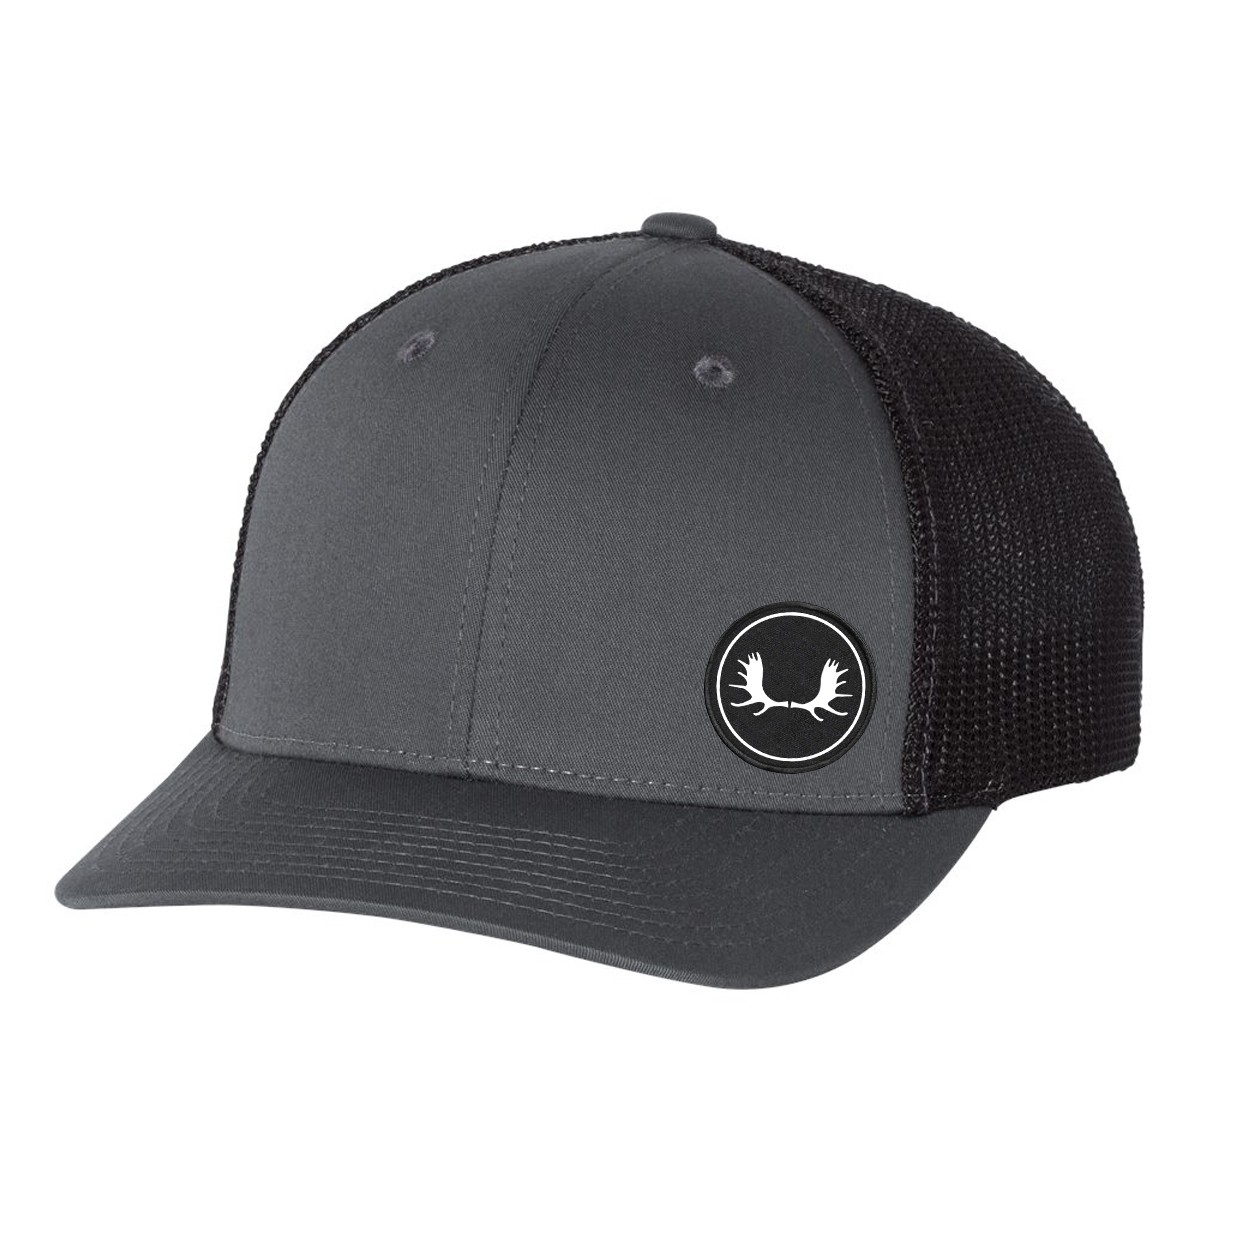 Hunt Moose Icon Logo Night Out Woven Circle Patch Snapback Trucker Hat Gray/Black (White Logo)